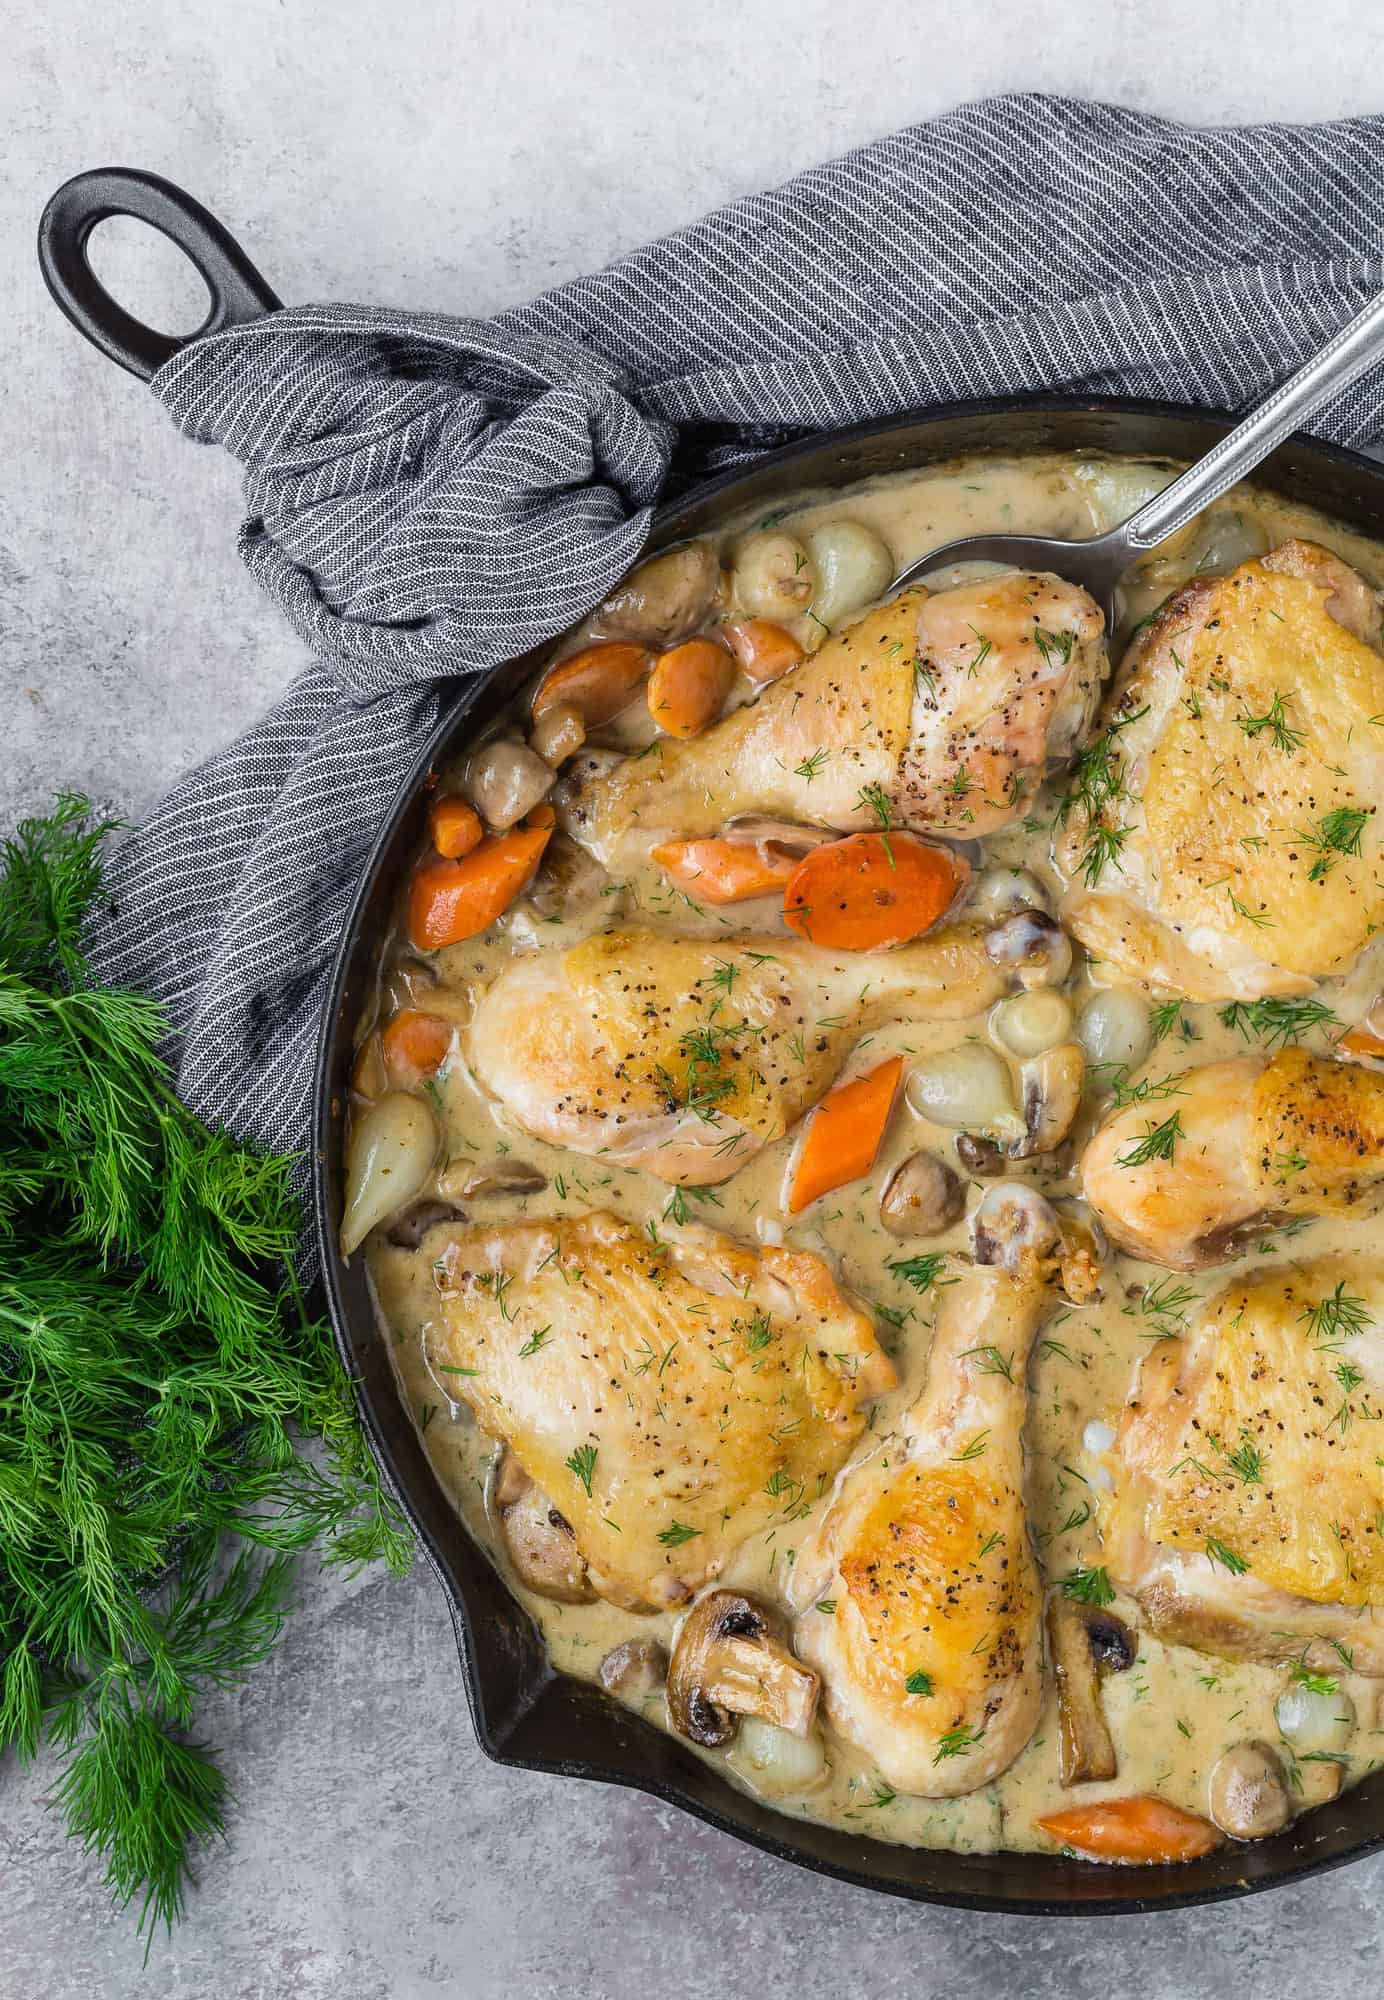 Chicken thighs and drumsticks in a pan.